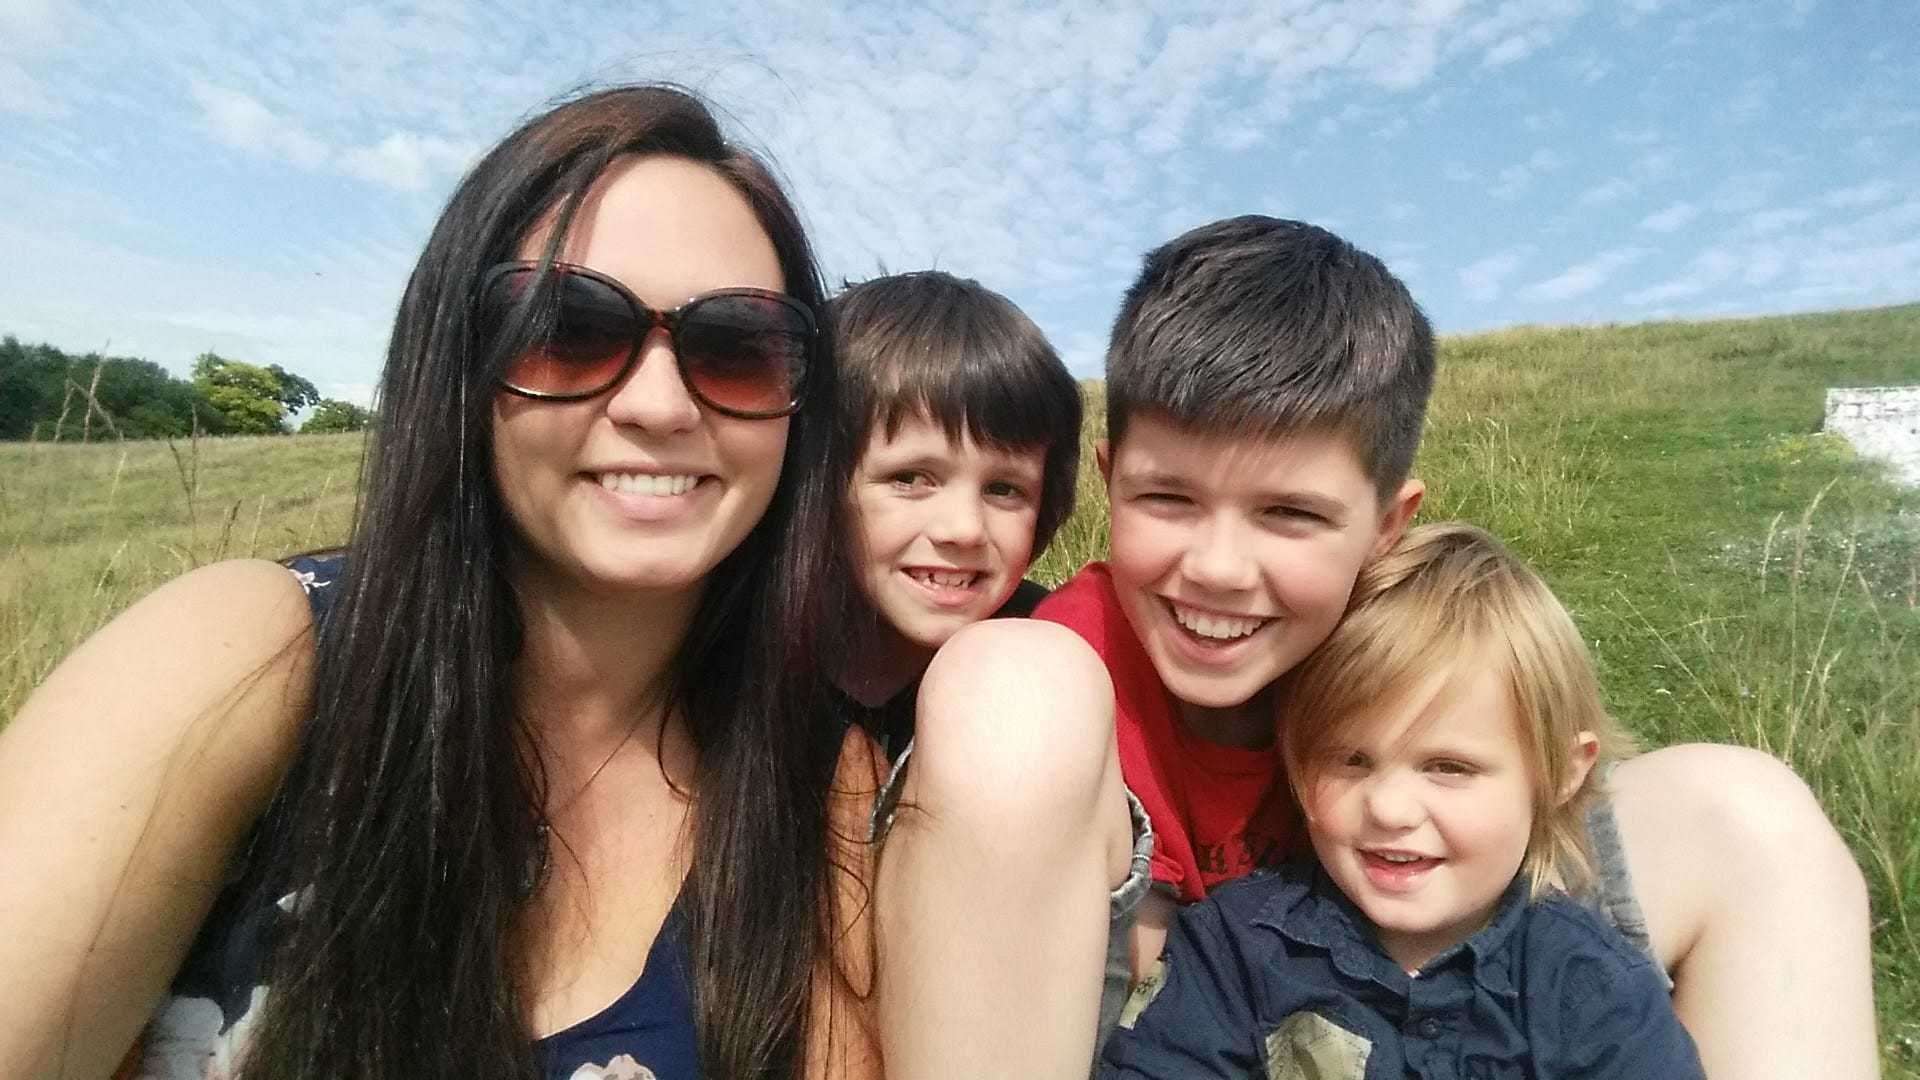 Louise Turner went on adventures with her children before the accident in 2019